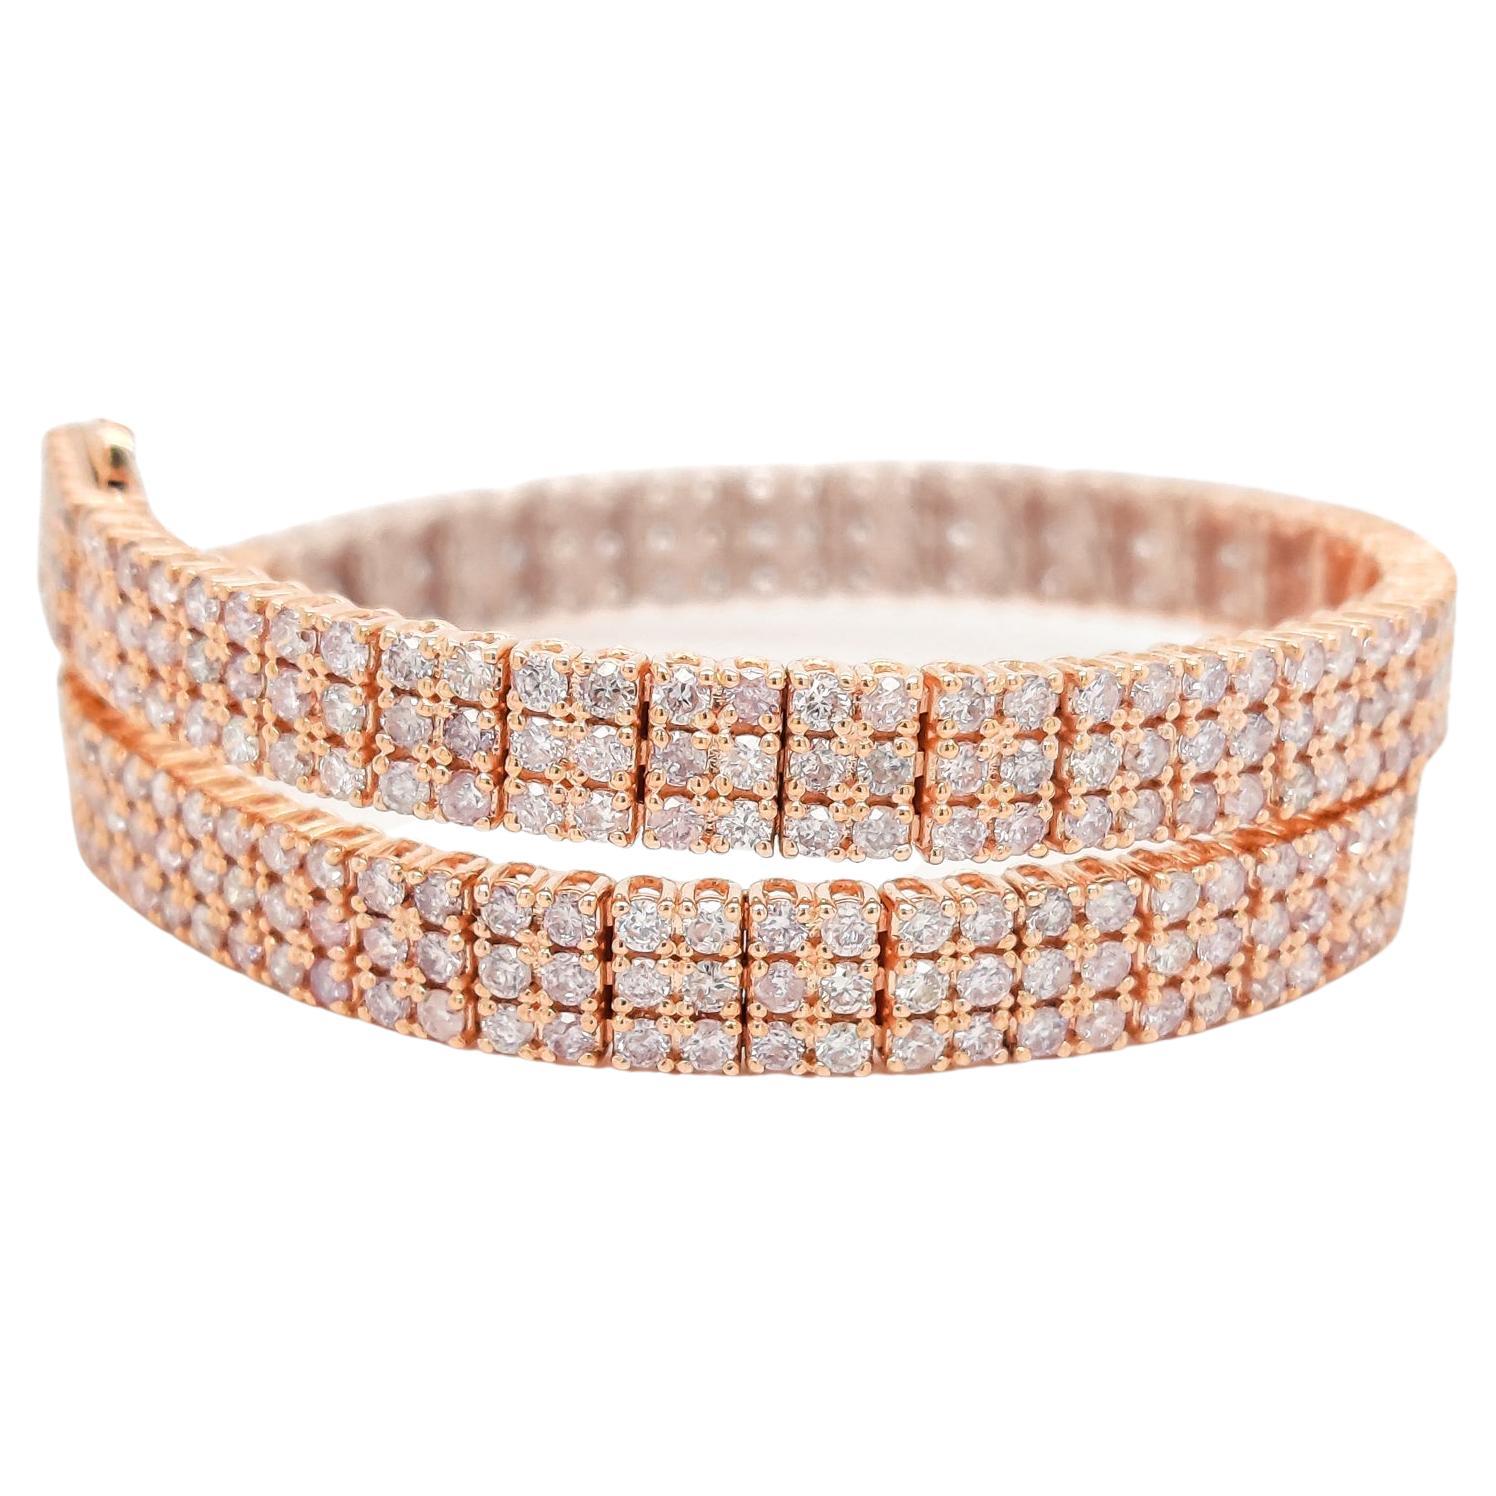 FOR US CUSTOMERS NO VAT.

In this gorgeous 14kt pink gold bracelet 300 mesmerizingly sparkling pink diamonds, totaling 4.40 carats, are all beautifully set in three raws and make a very feminine, elegant, and unique design. Pink diamonds and pink